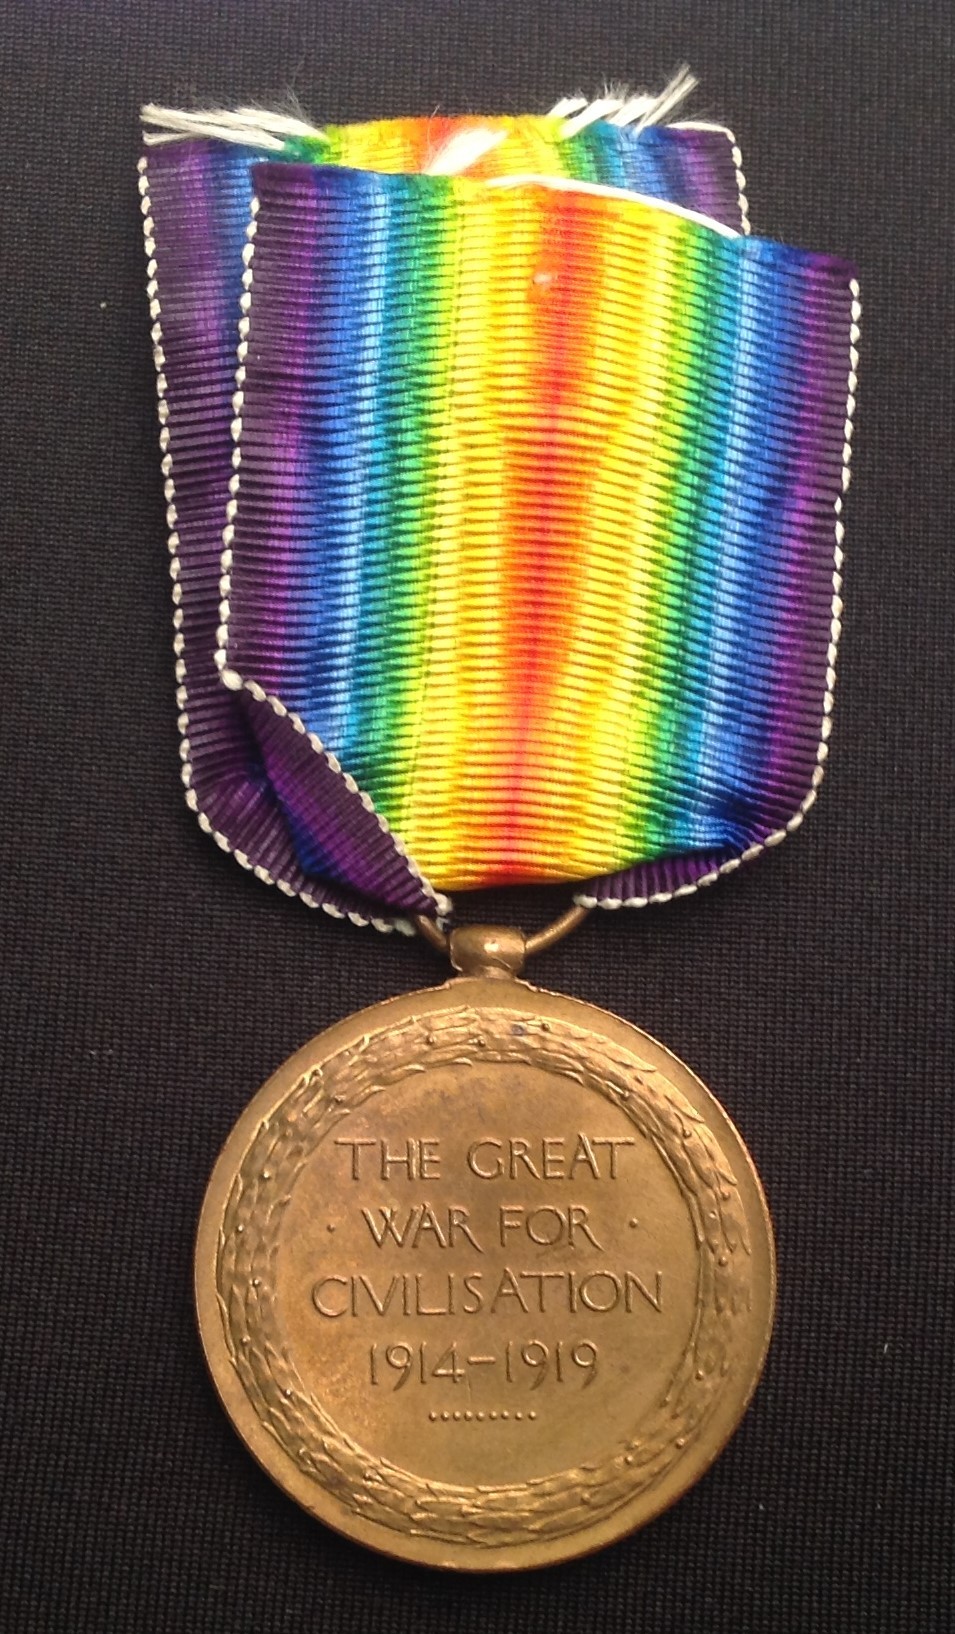 WW1 British Victory Medal to K16685 Albert Lennard Glass, SPO, RN Complete with original ribbon - Image 3 of 4